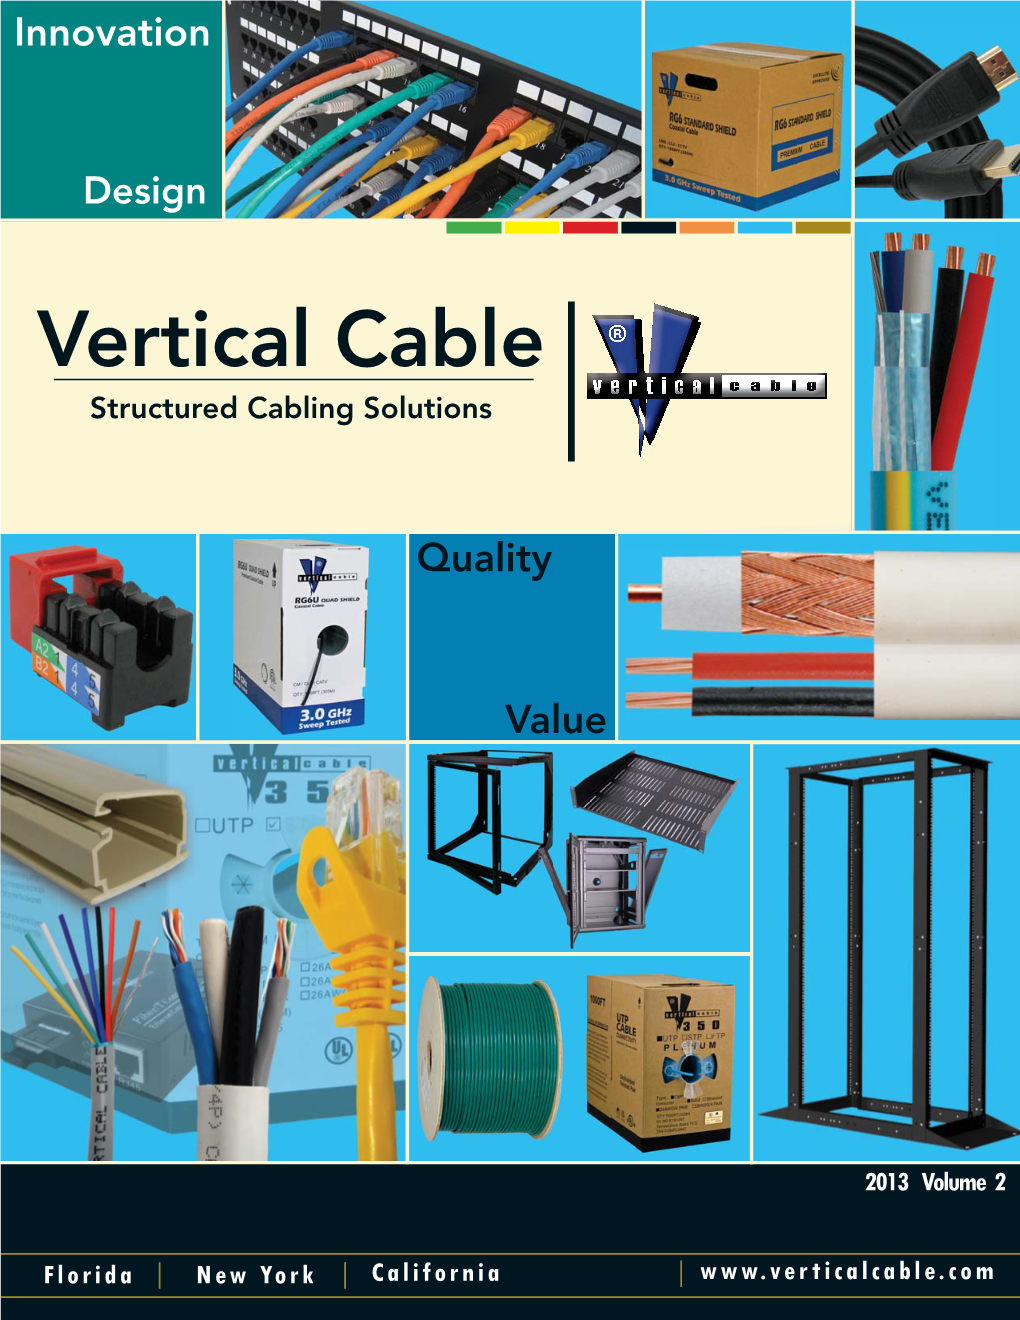 Vertical Cable Structured Cabling Solutions